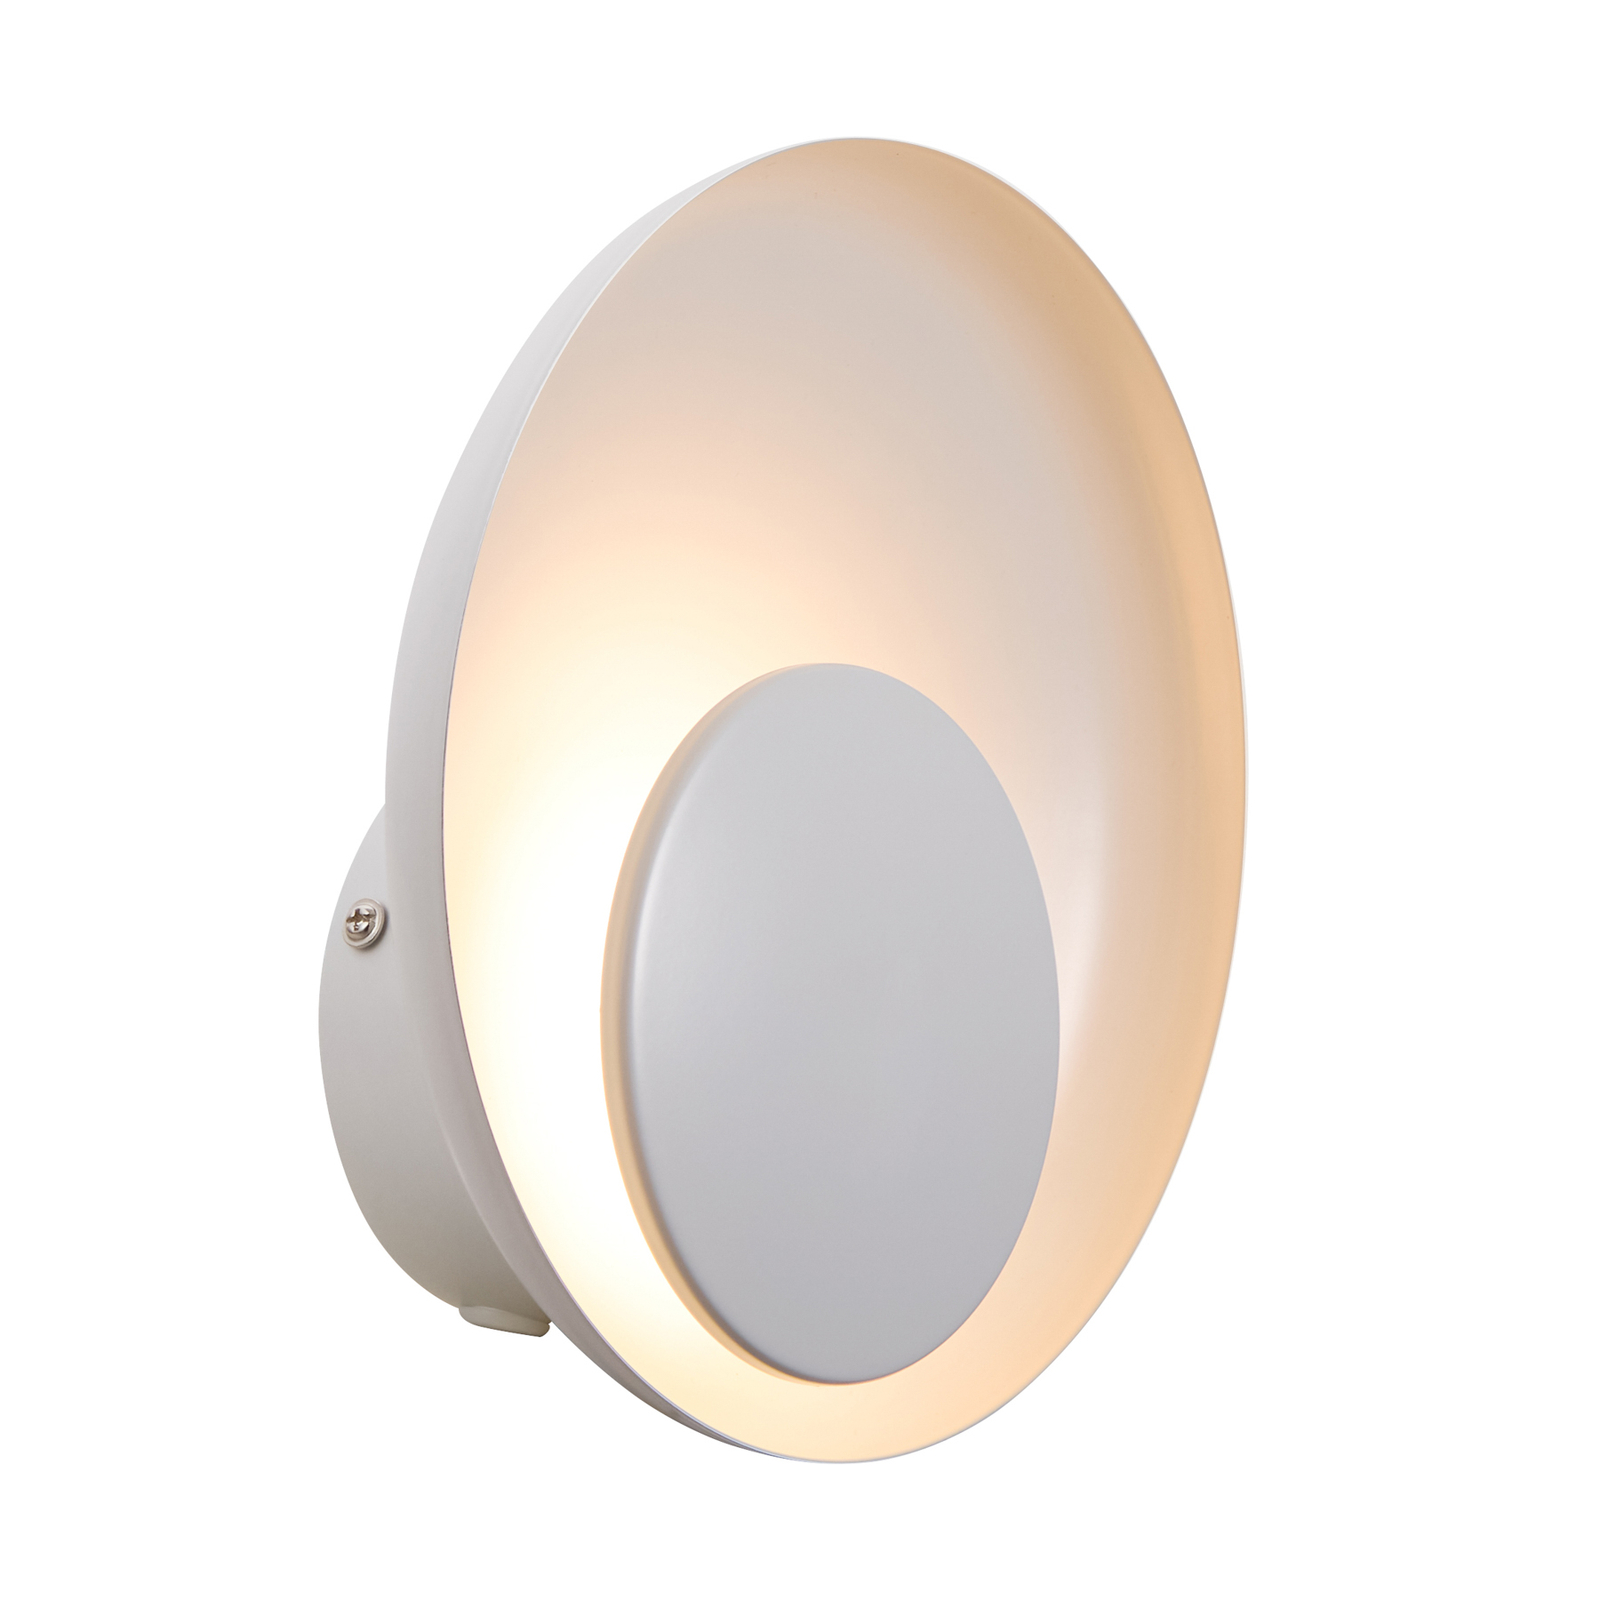 Marsi LED wall light with a cable/plug, white